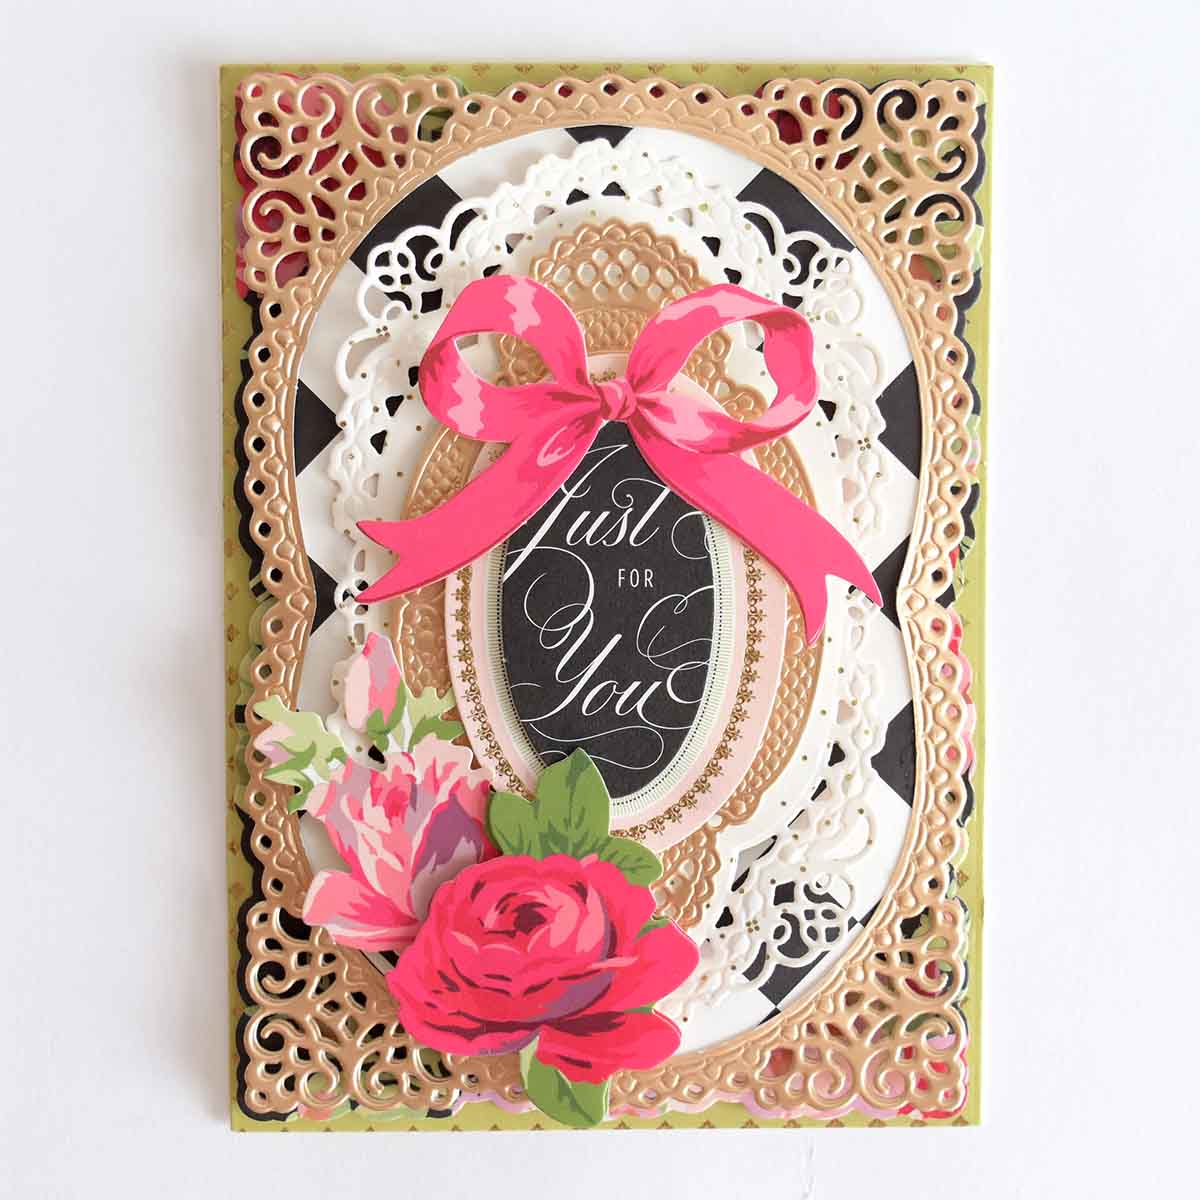 a card with a pink rose on it.